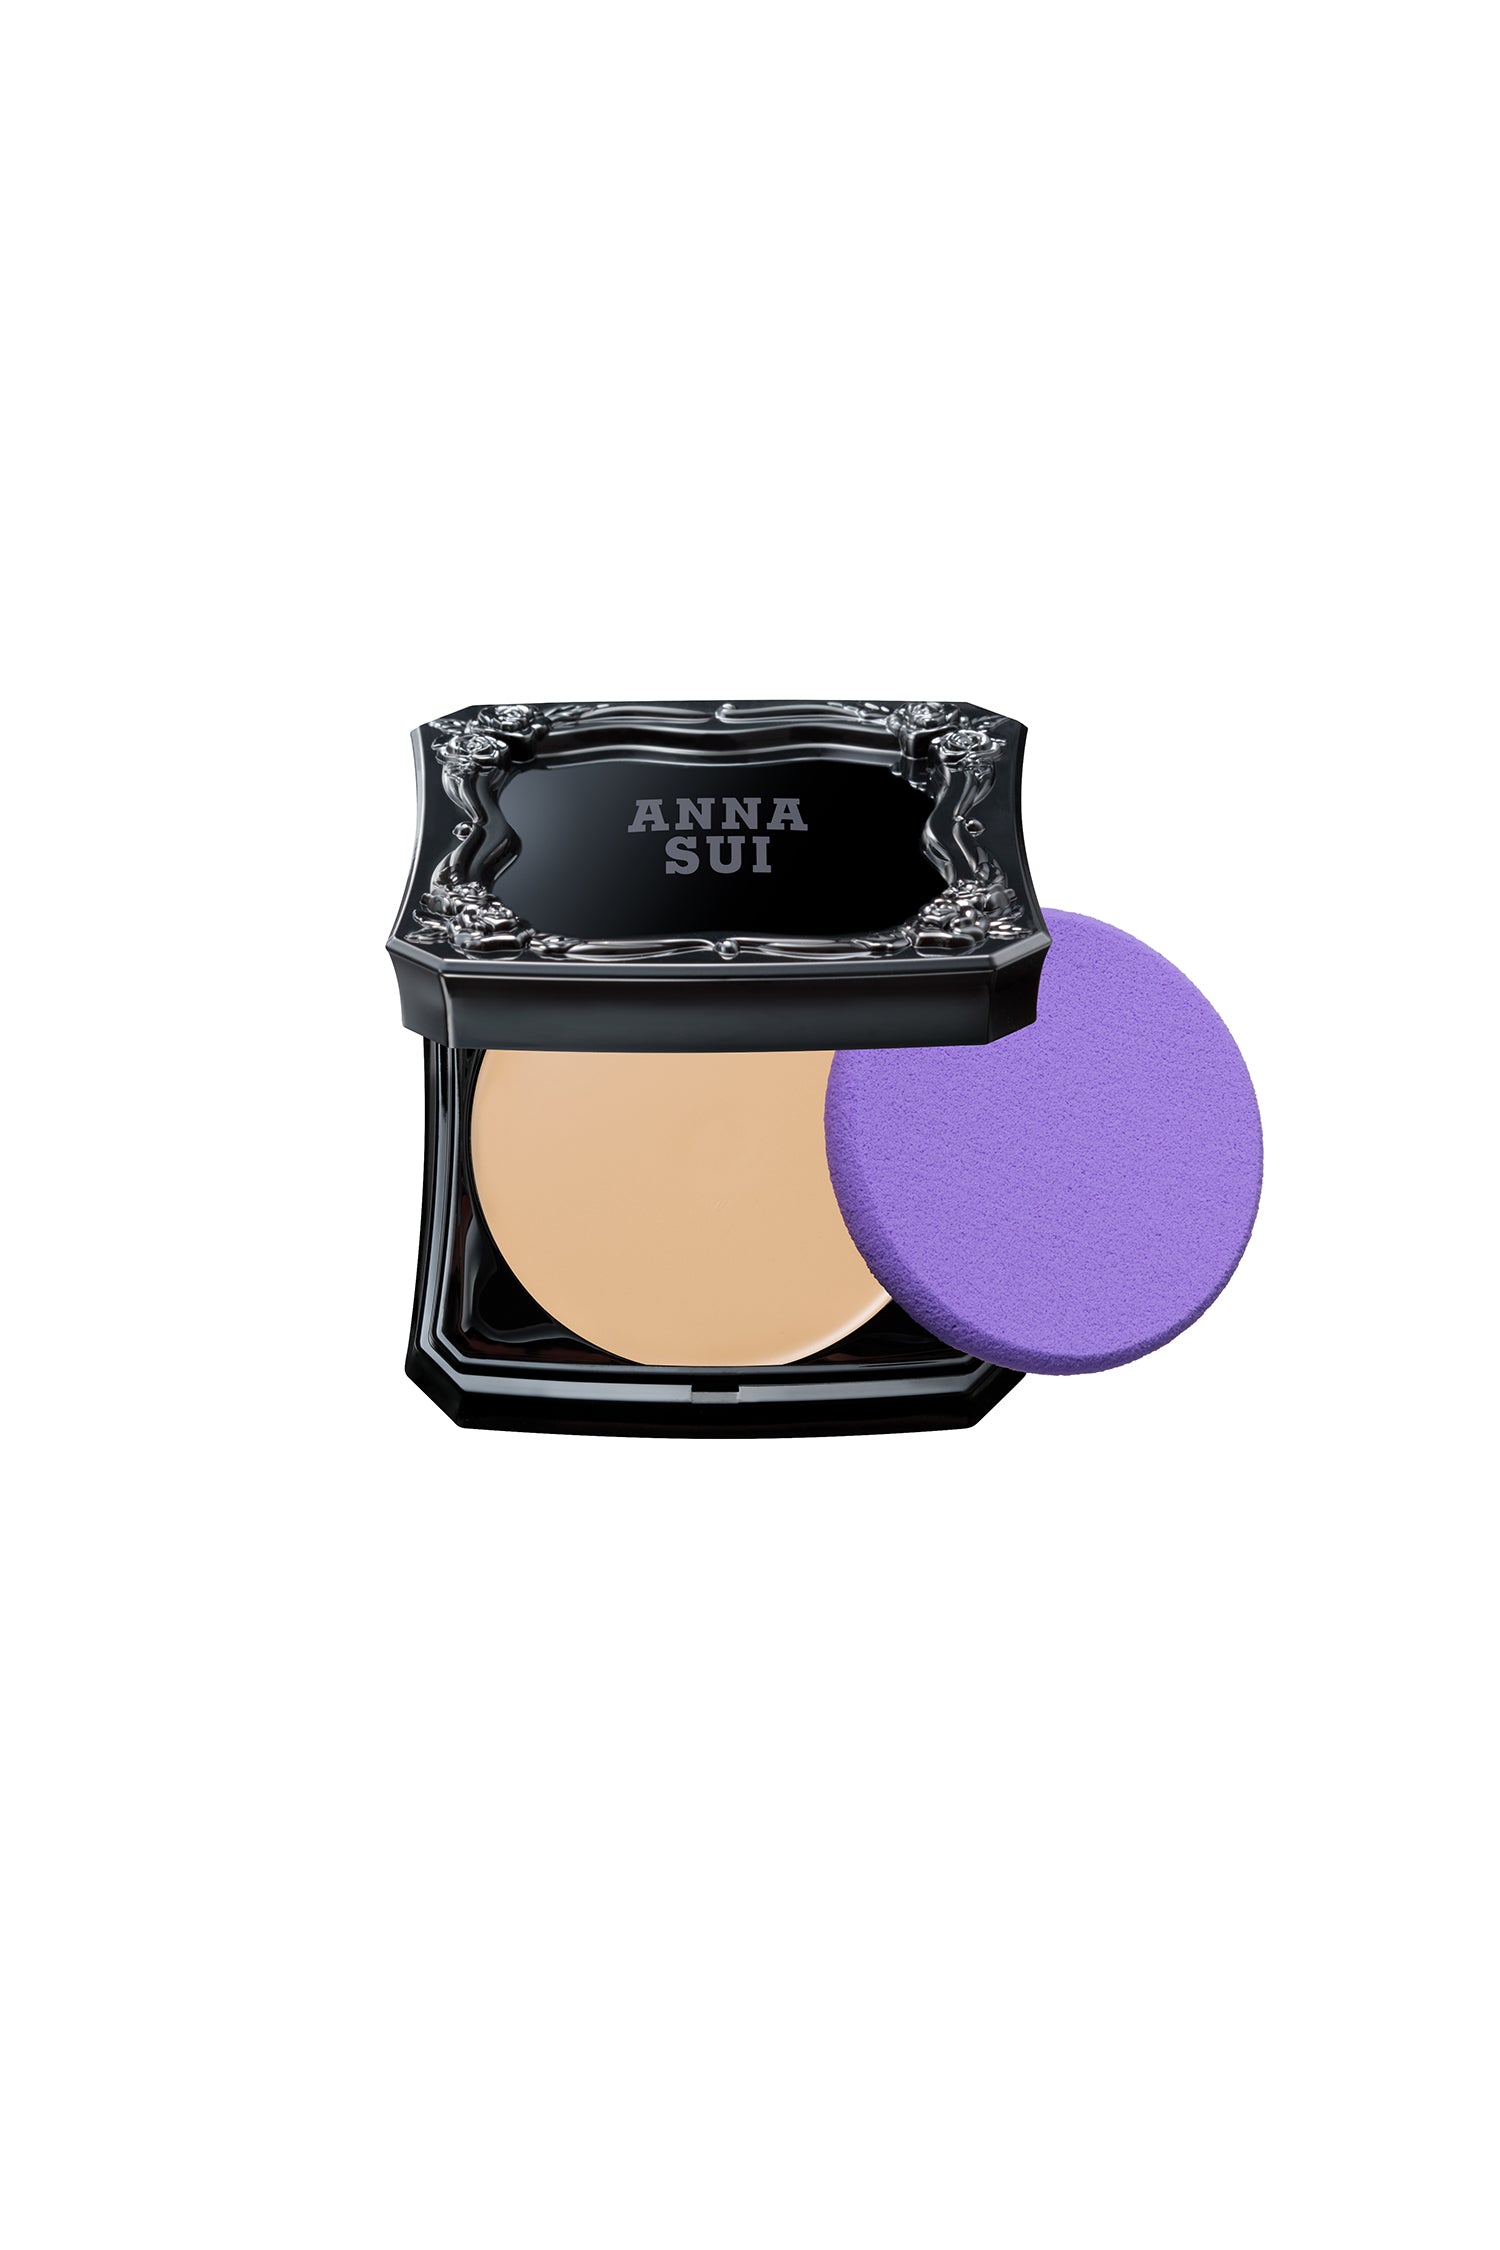 LIGHT foundation in a black container with raised rose pattern and Anna Sui label